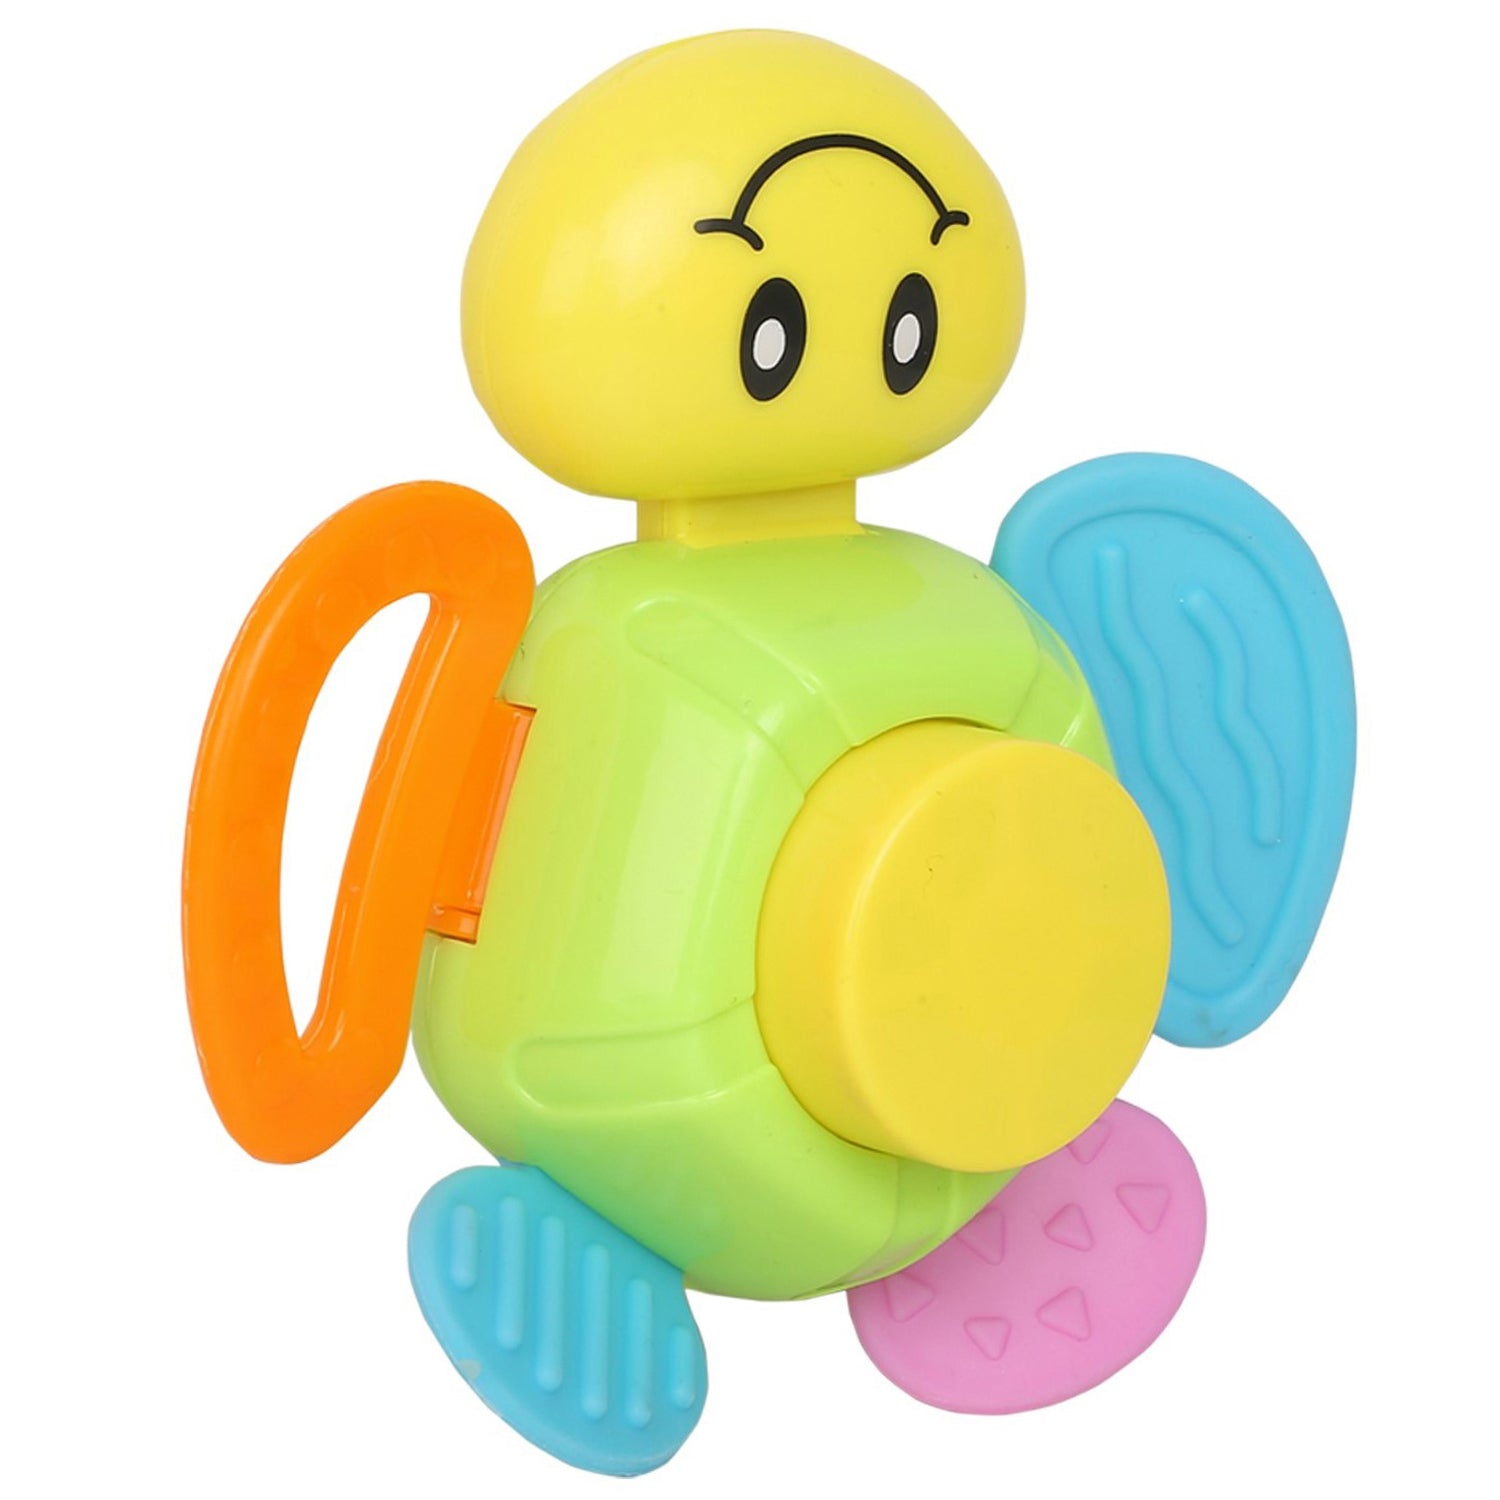 Baby Moo Smiley Multicolour Touch Button Rattle Toy